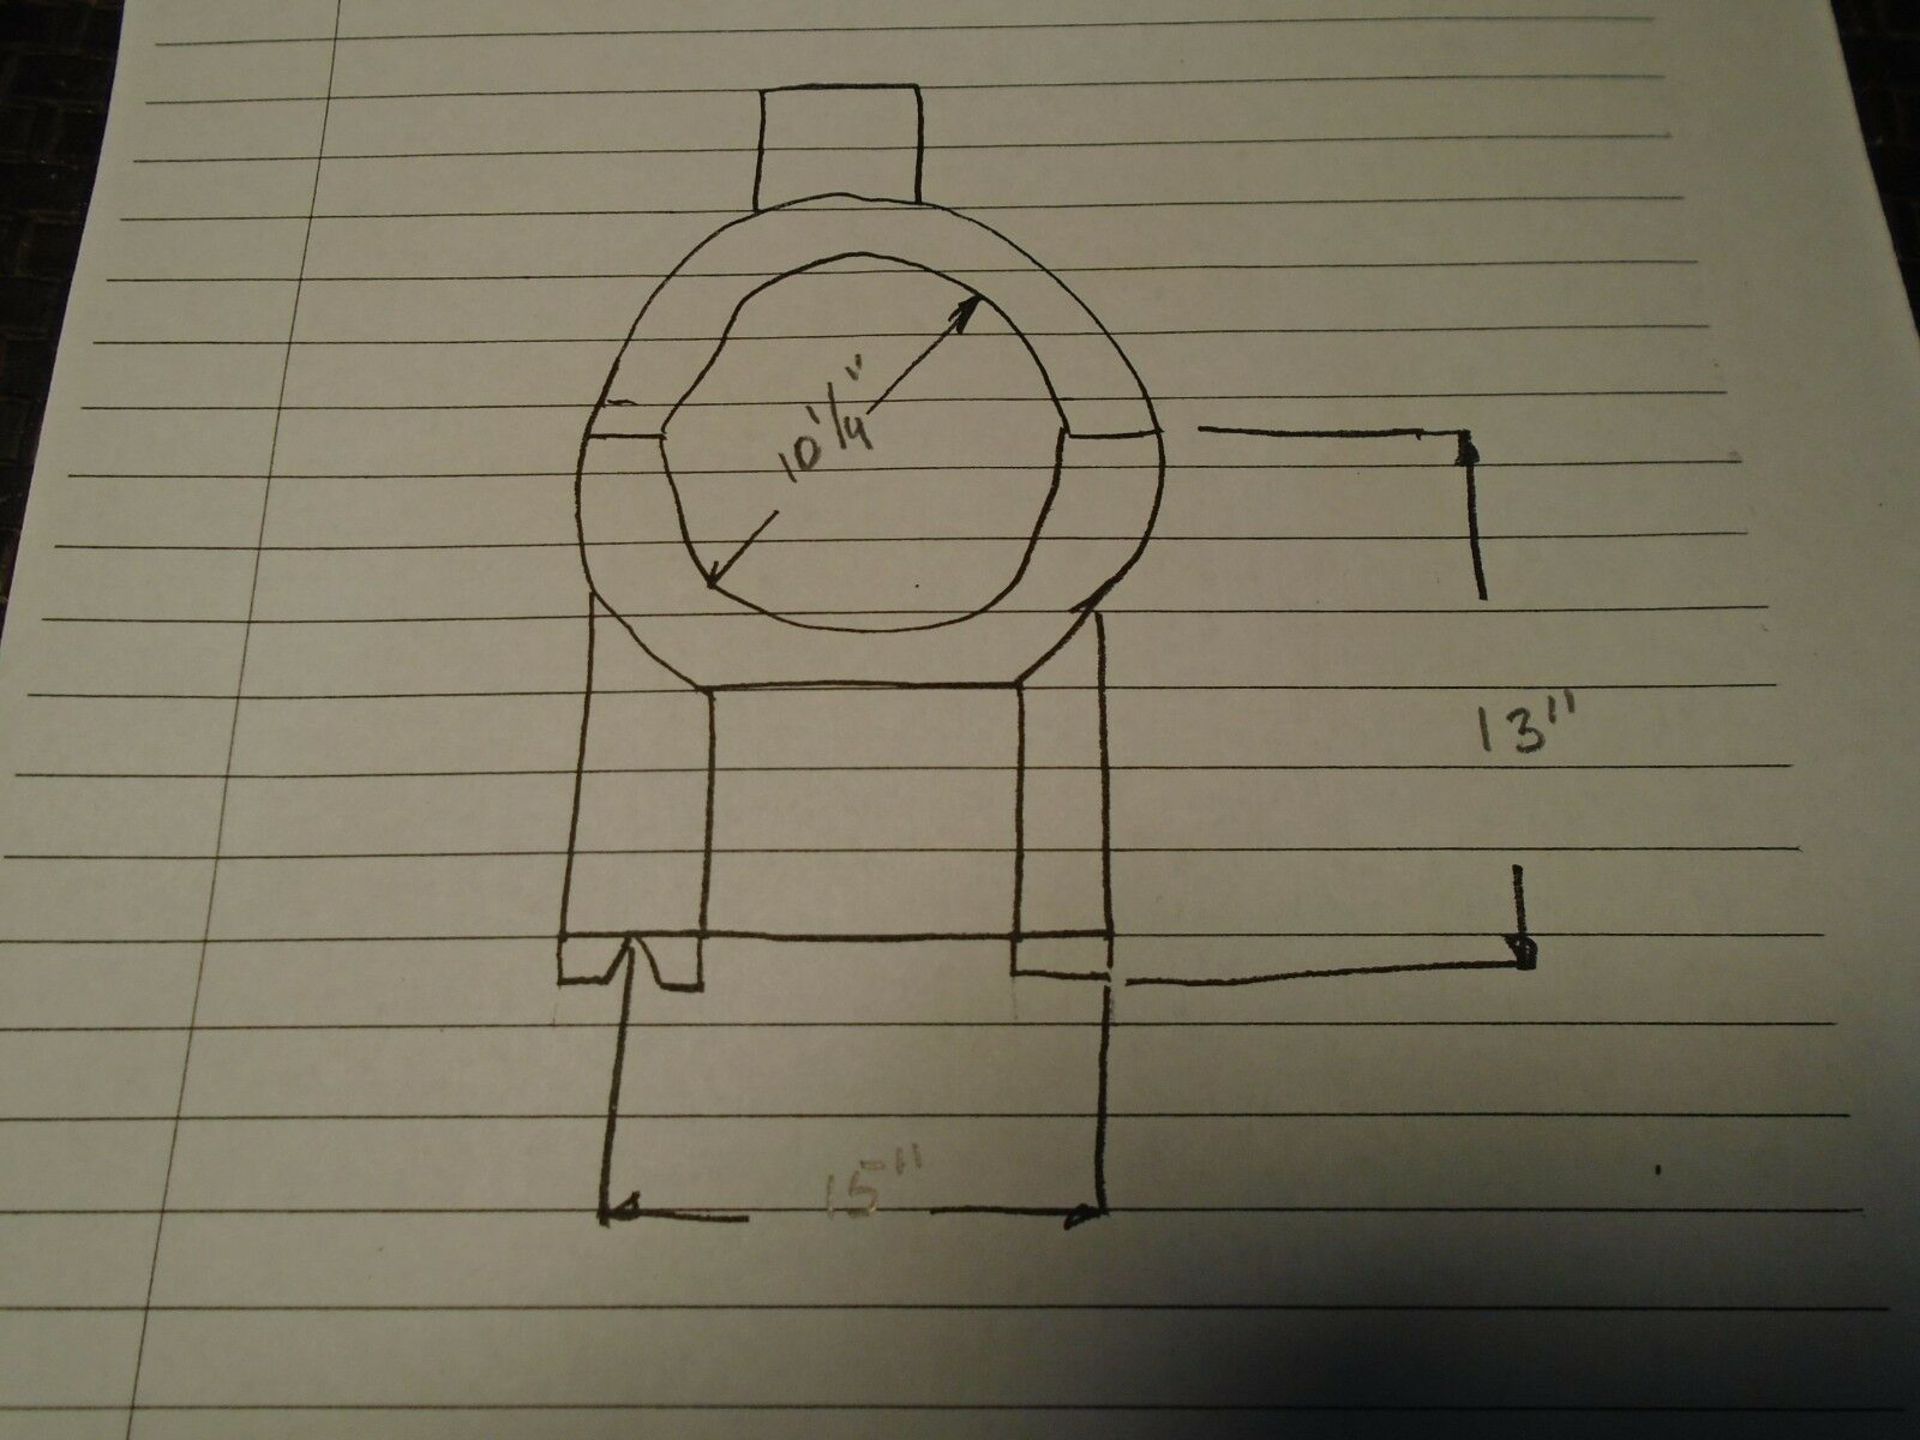 Steady Rest for 26" Swing Engine Lathe 10 1/4" id x 13" Center Line See Drawing for Dimensions - Image 8 of 8